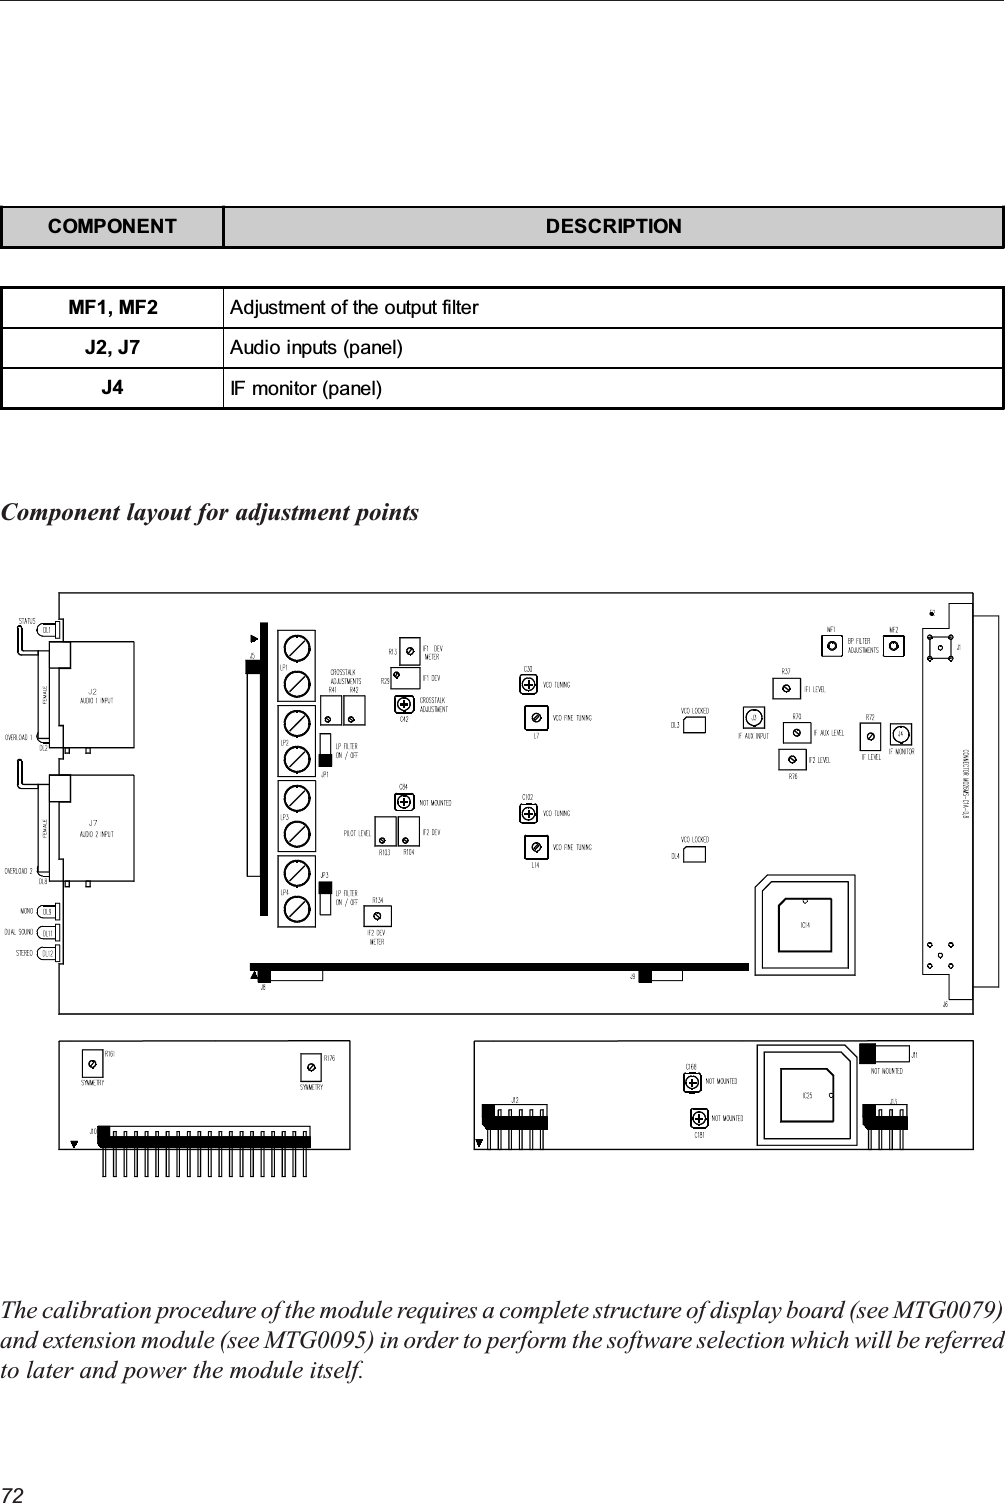 72Component layout for adjustment pointsCOMPONENT DESCRIPTIONMF1, MF2 Adjustment of the output filterJ2, J7 Audio inputs (panel)J4 IF monitor (panel)The calibration procedure of the module requires a complete structure of display board (see MTG0079)and extension module (see MTG0095) in order to perform the software selection which will be referredto later and power the module itself.